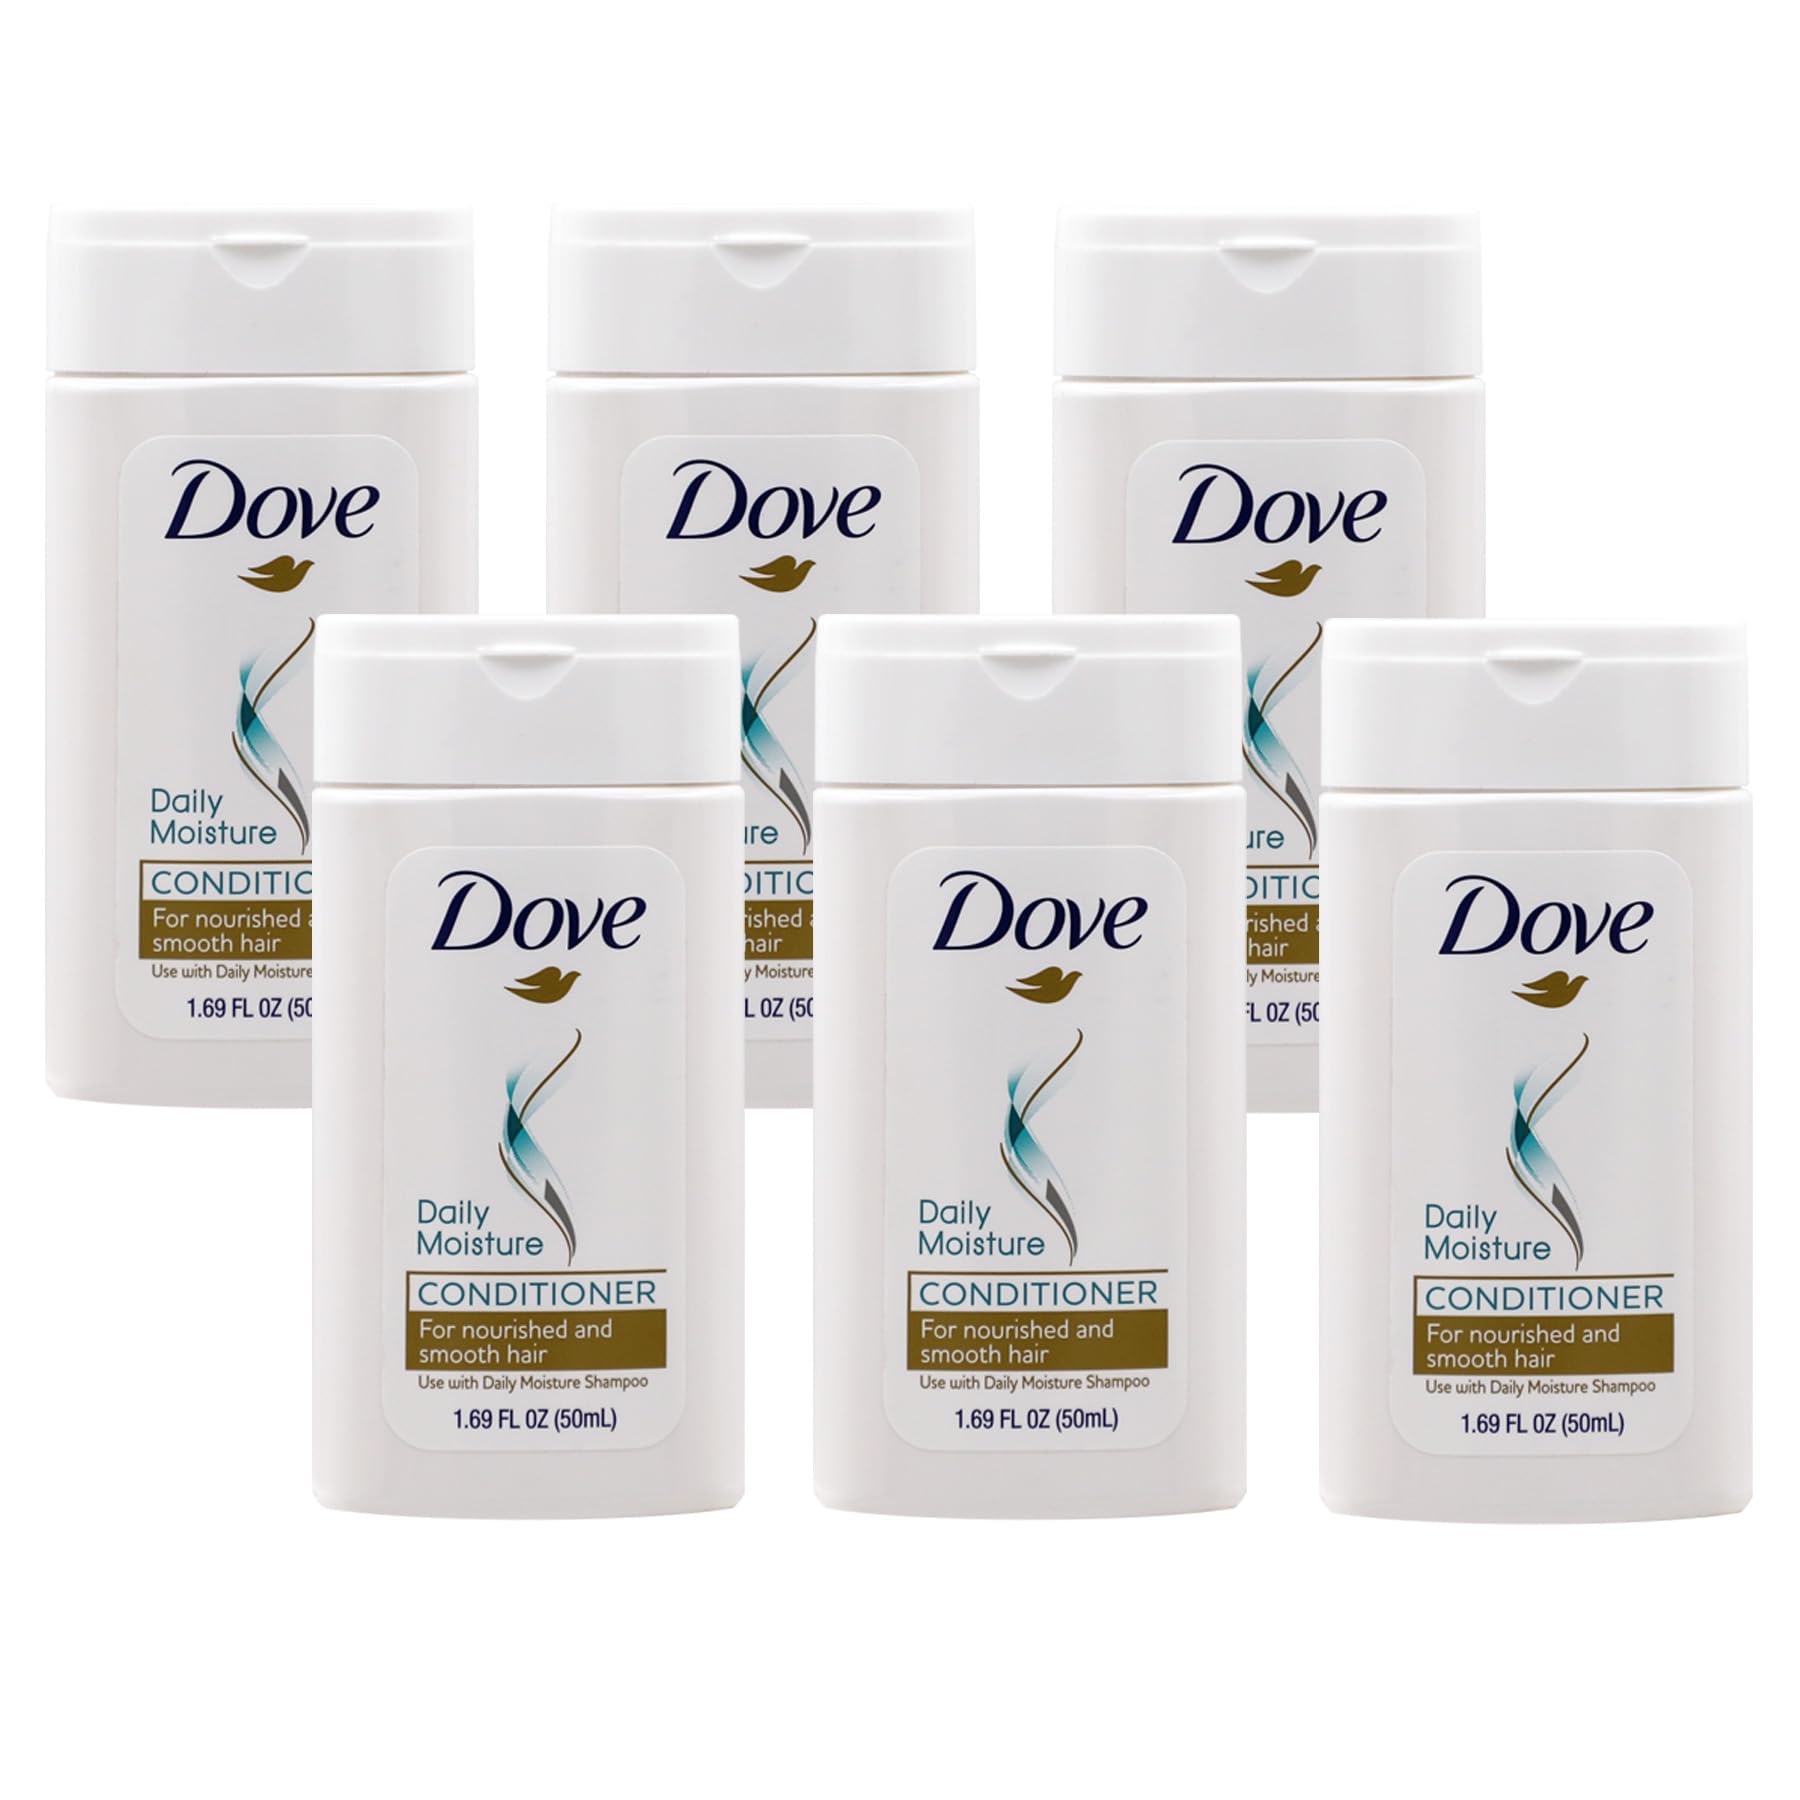 Dove Conditioner, Daily Moisture, Nourishing System for Smooth Hair, 6-Pack, 1.7 FL Oz, 6 Bottles